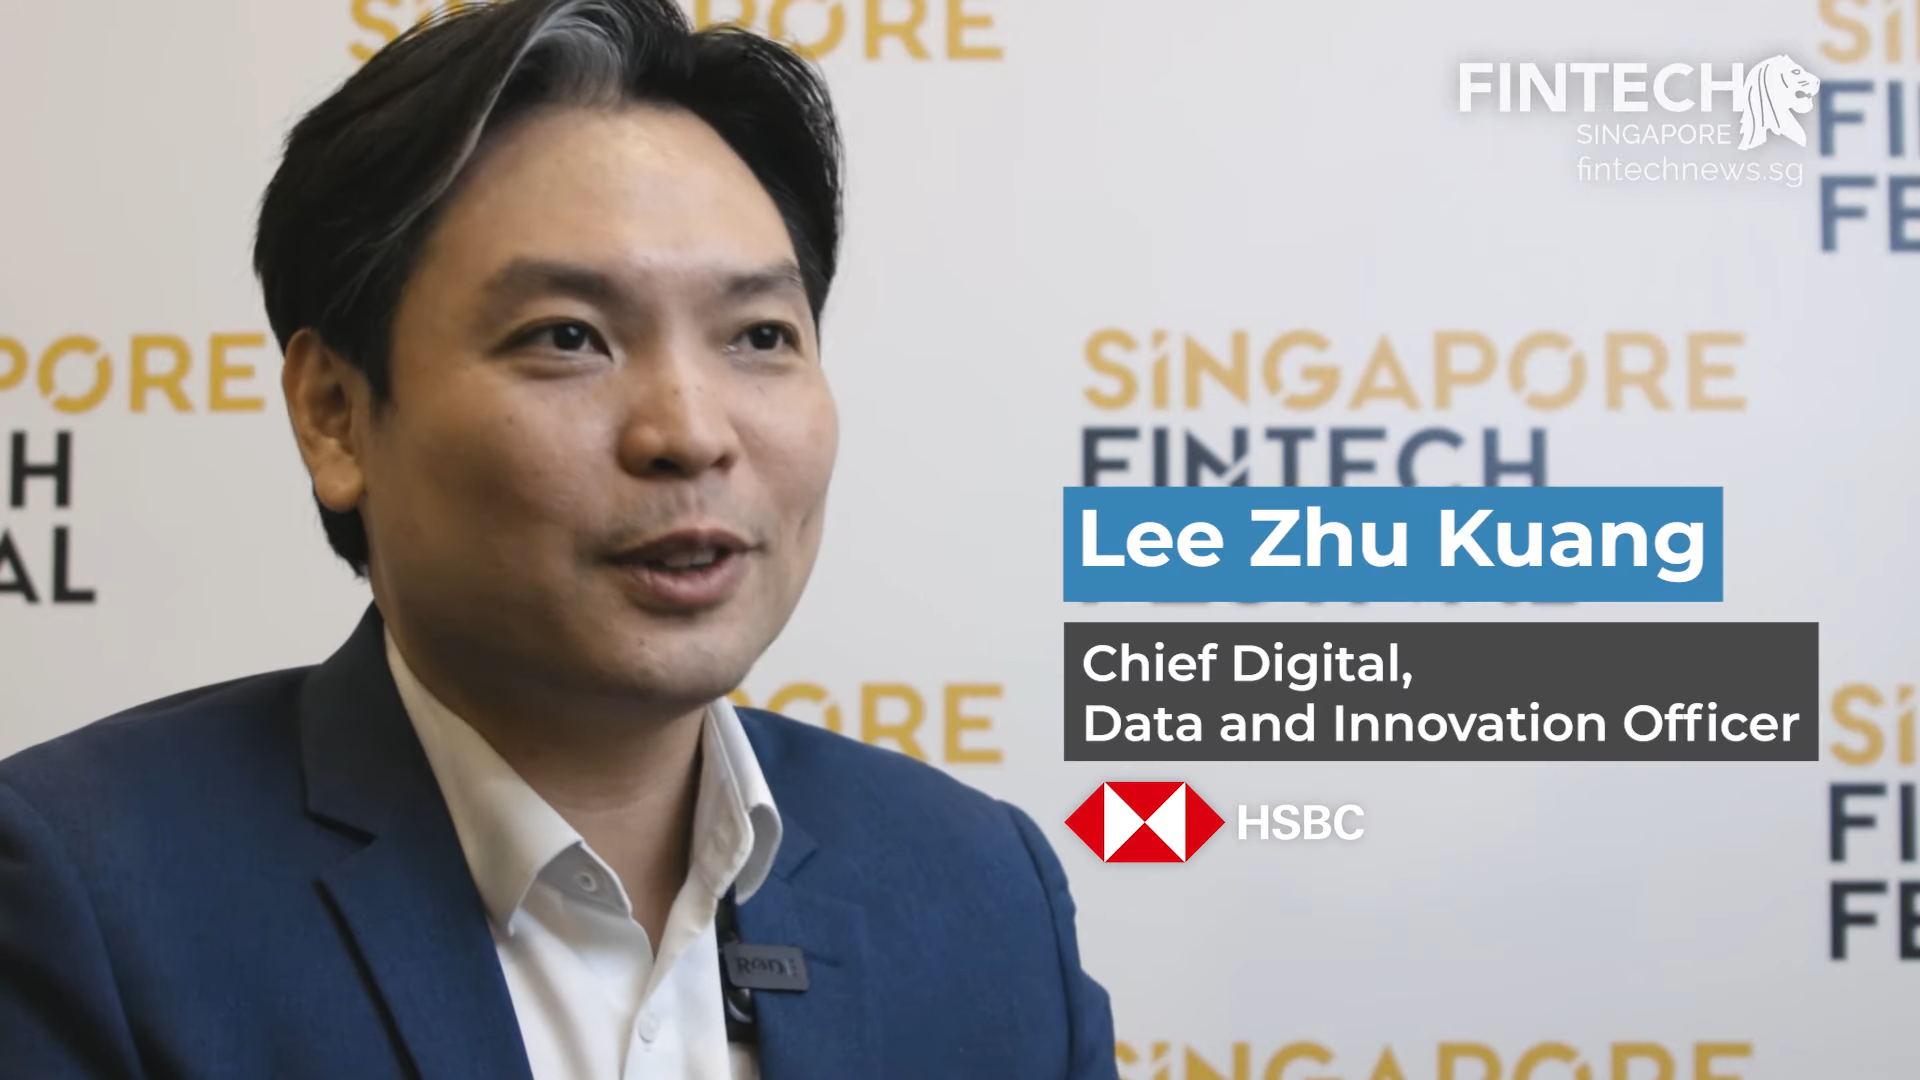 Lee Zhu Kuang, Chief Digital, Data and Innovation Officer, HSBC